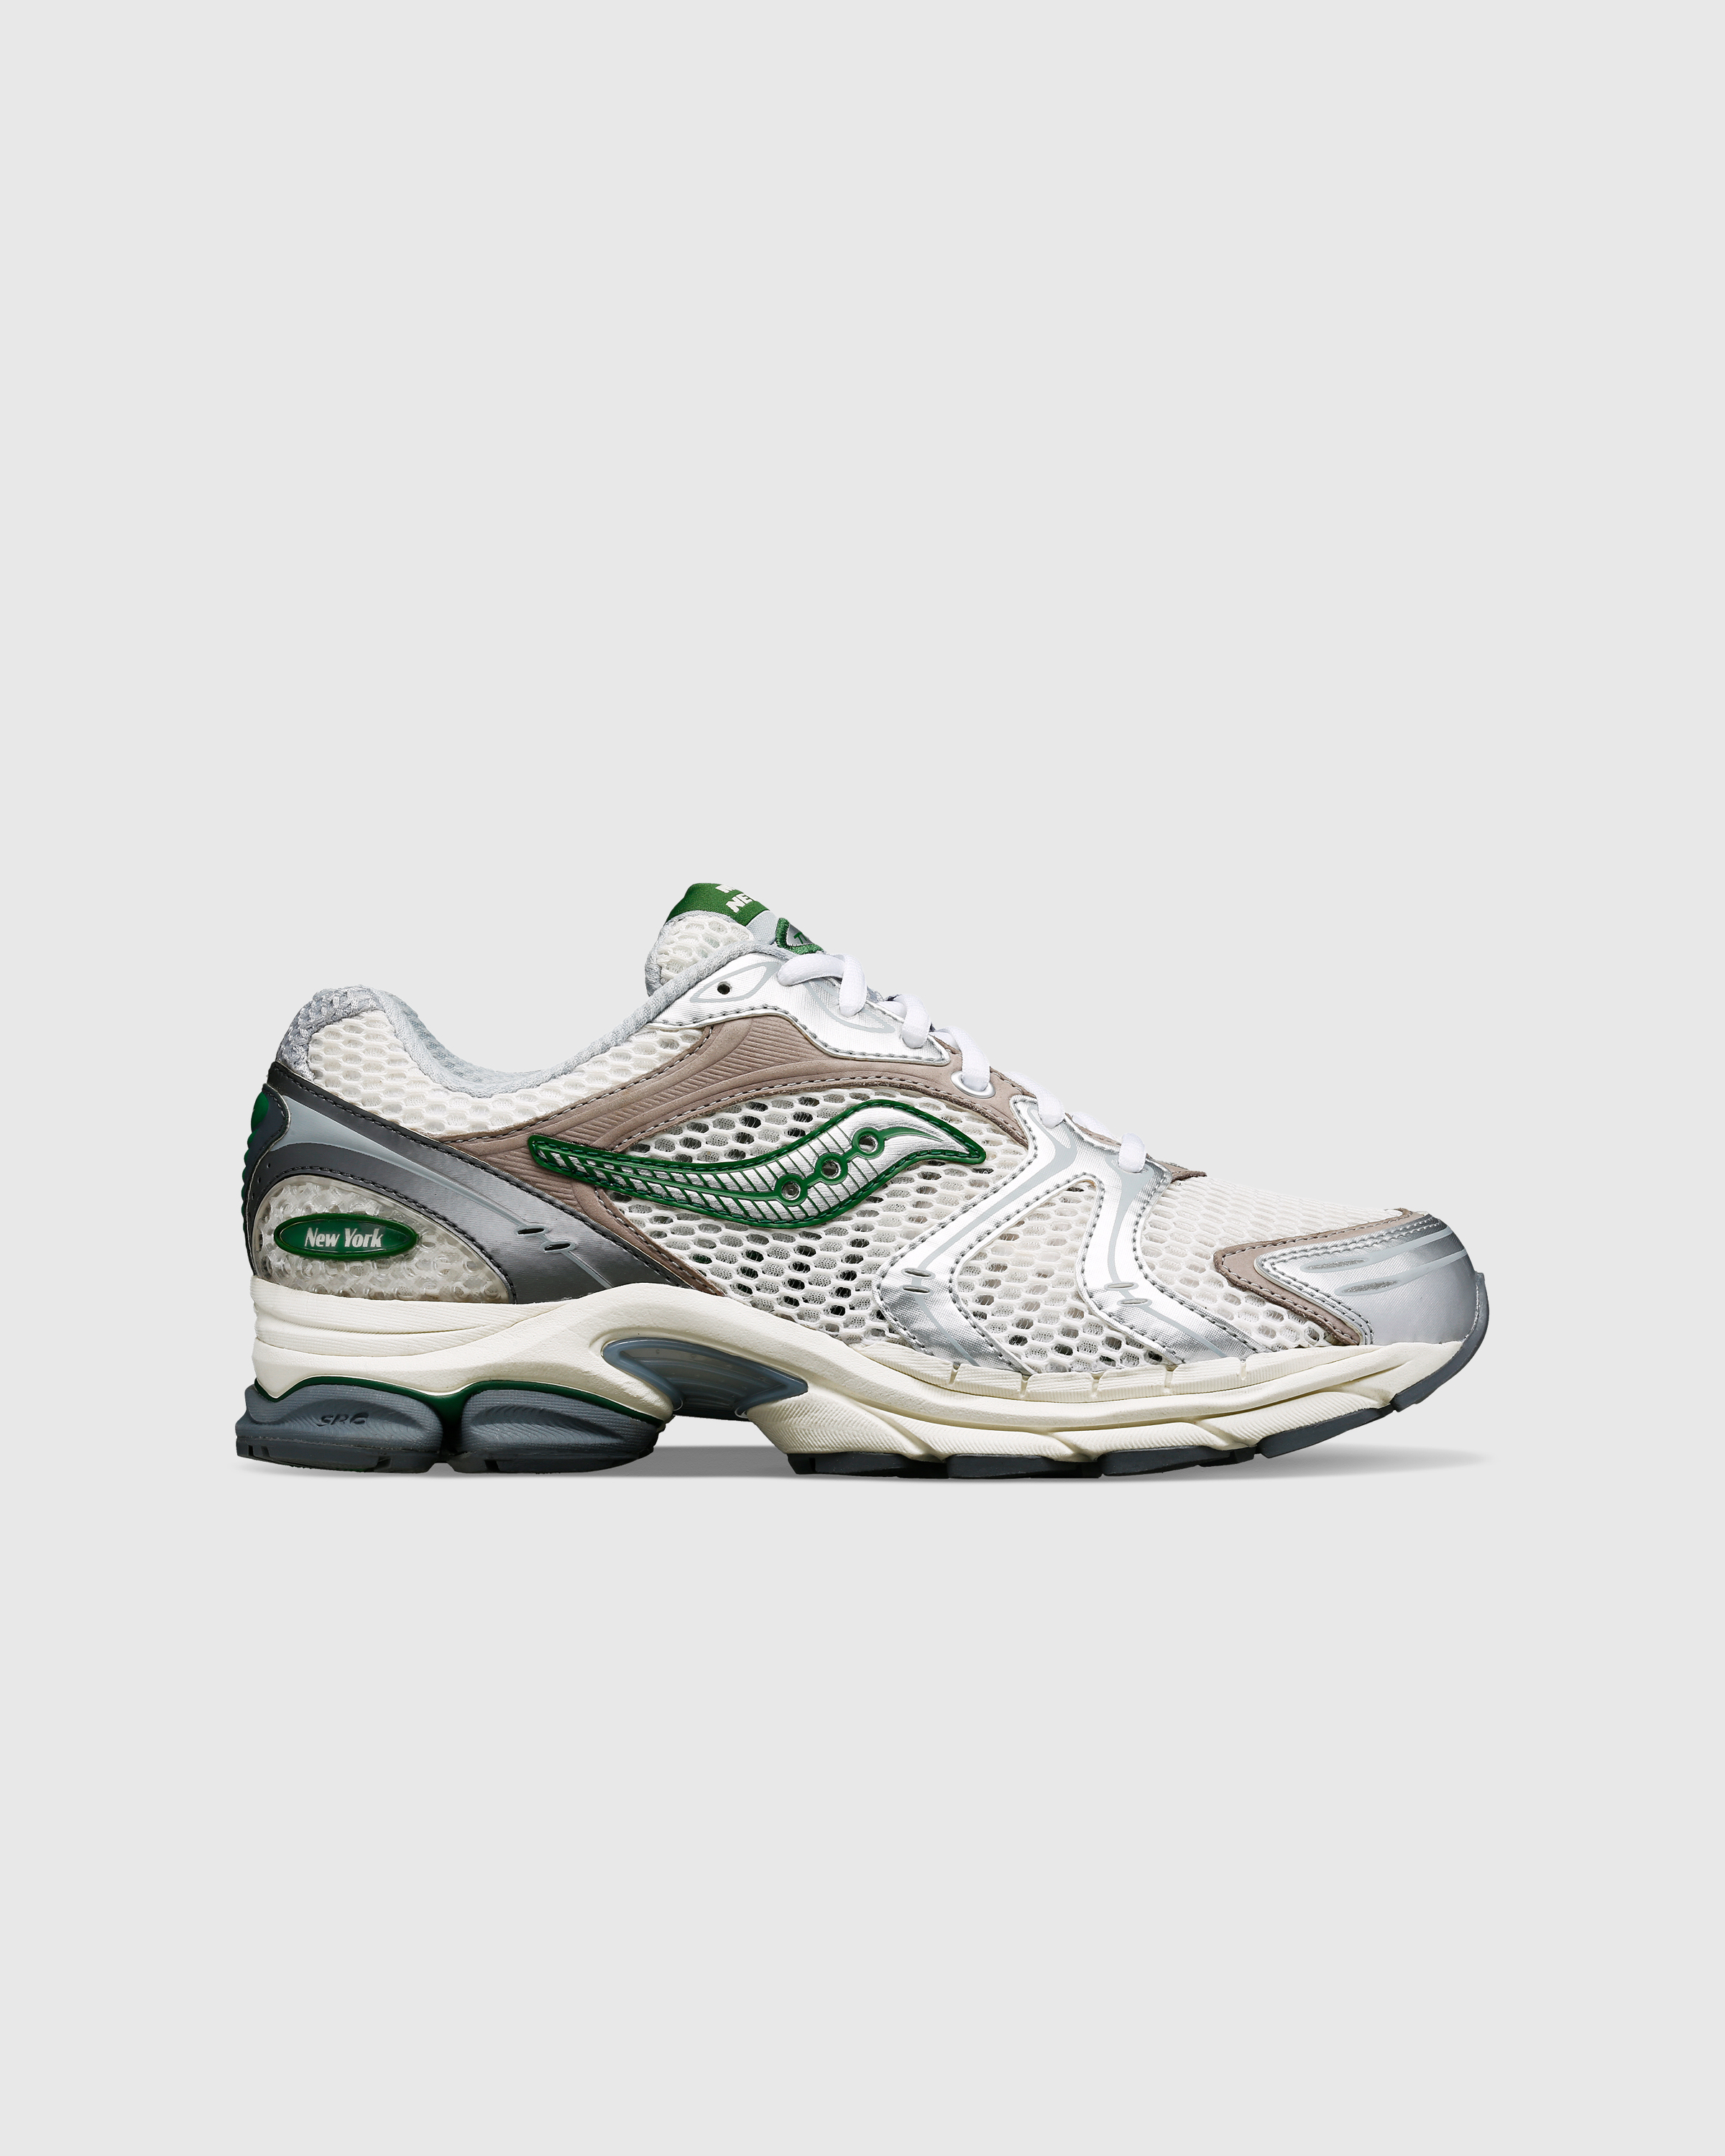 Saucony x Minted – ProGrid Triumph 4 Cream/Green - Low Top Sneakers - Beige - Image 1